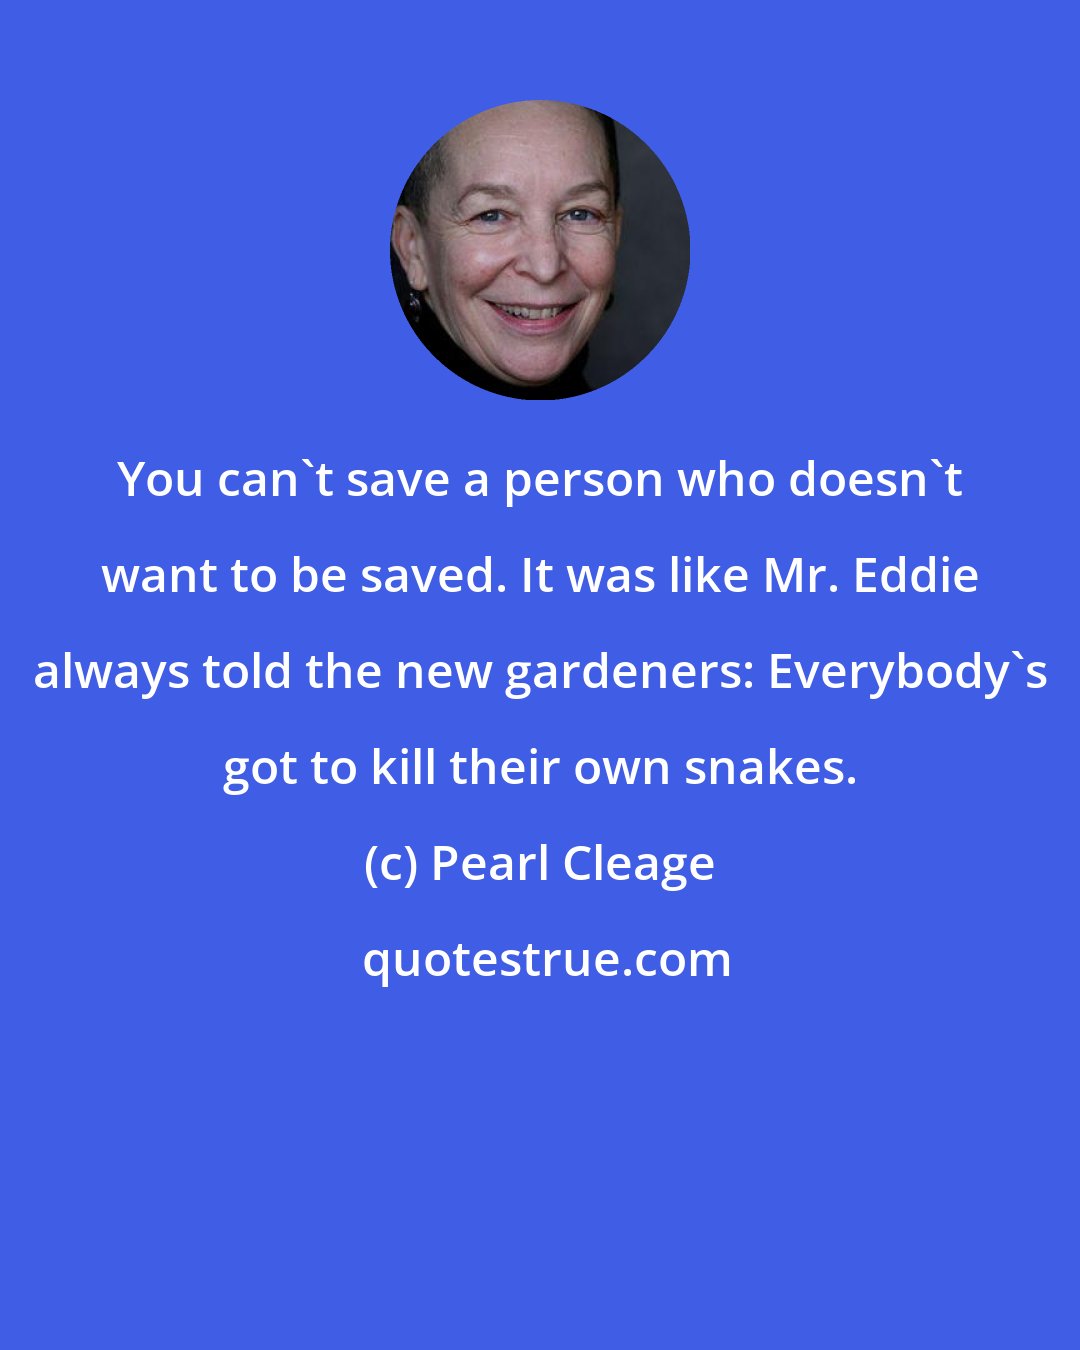 Pearl Cleage: You can't save a person who doesn't want to be saved. It was like Mr. Eddie always told the new gardeners: Everybody's got to kill their own snakes.